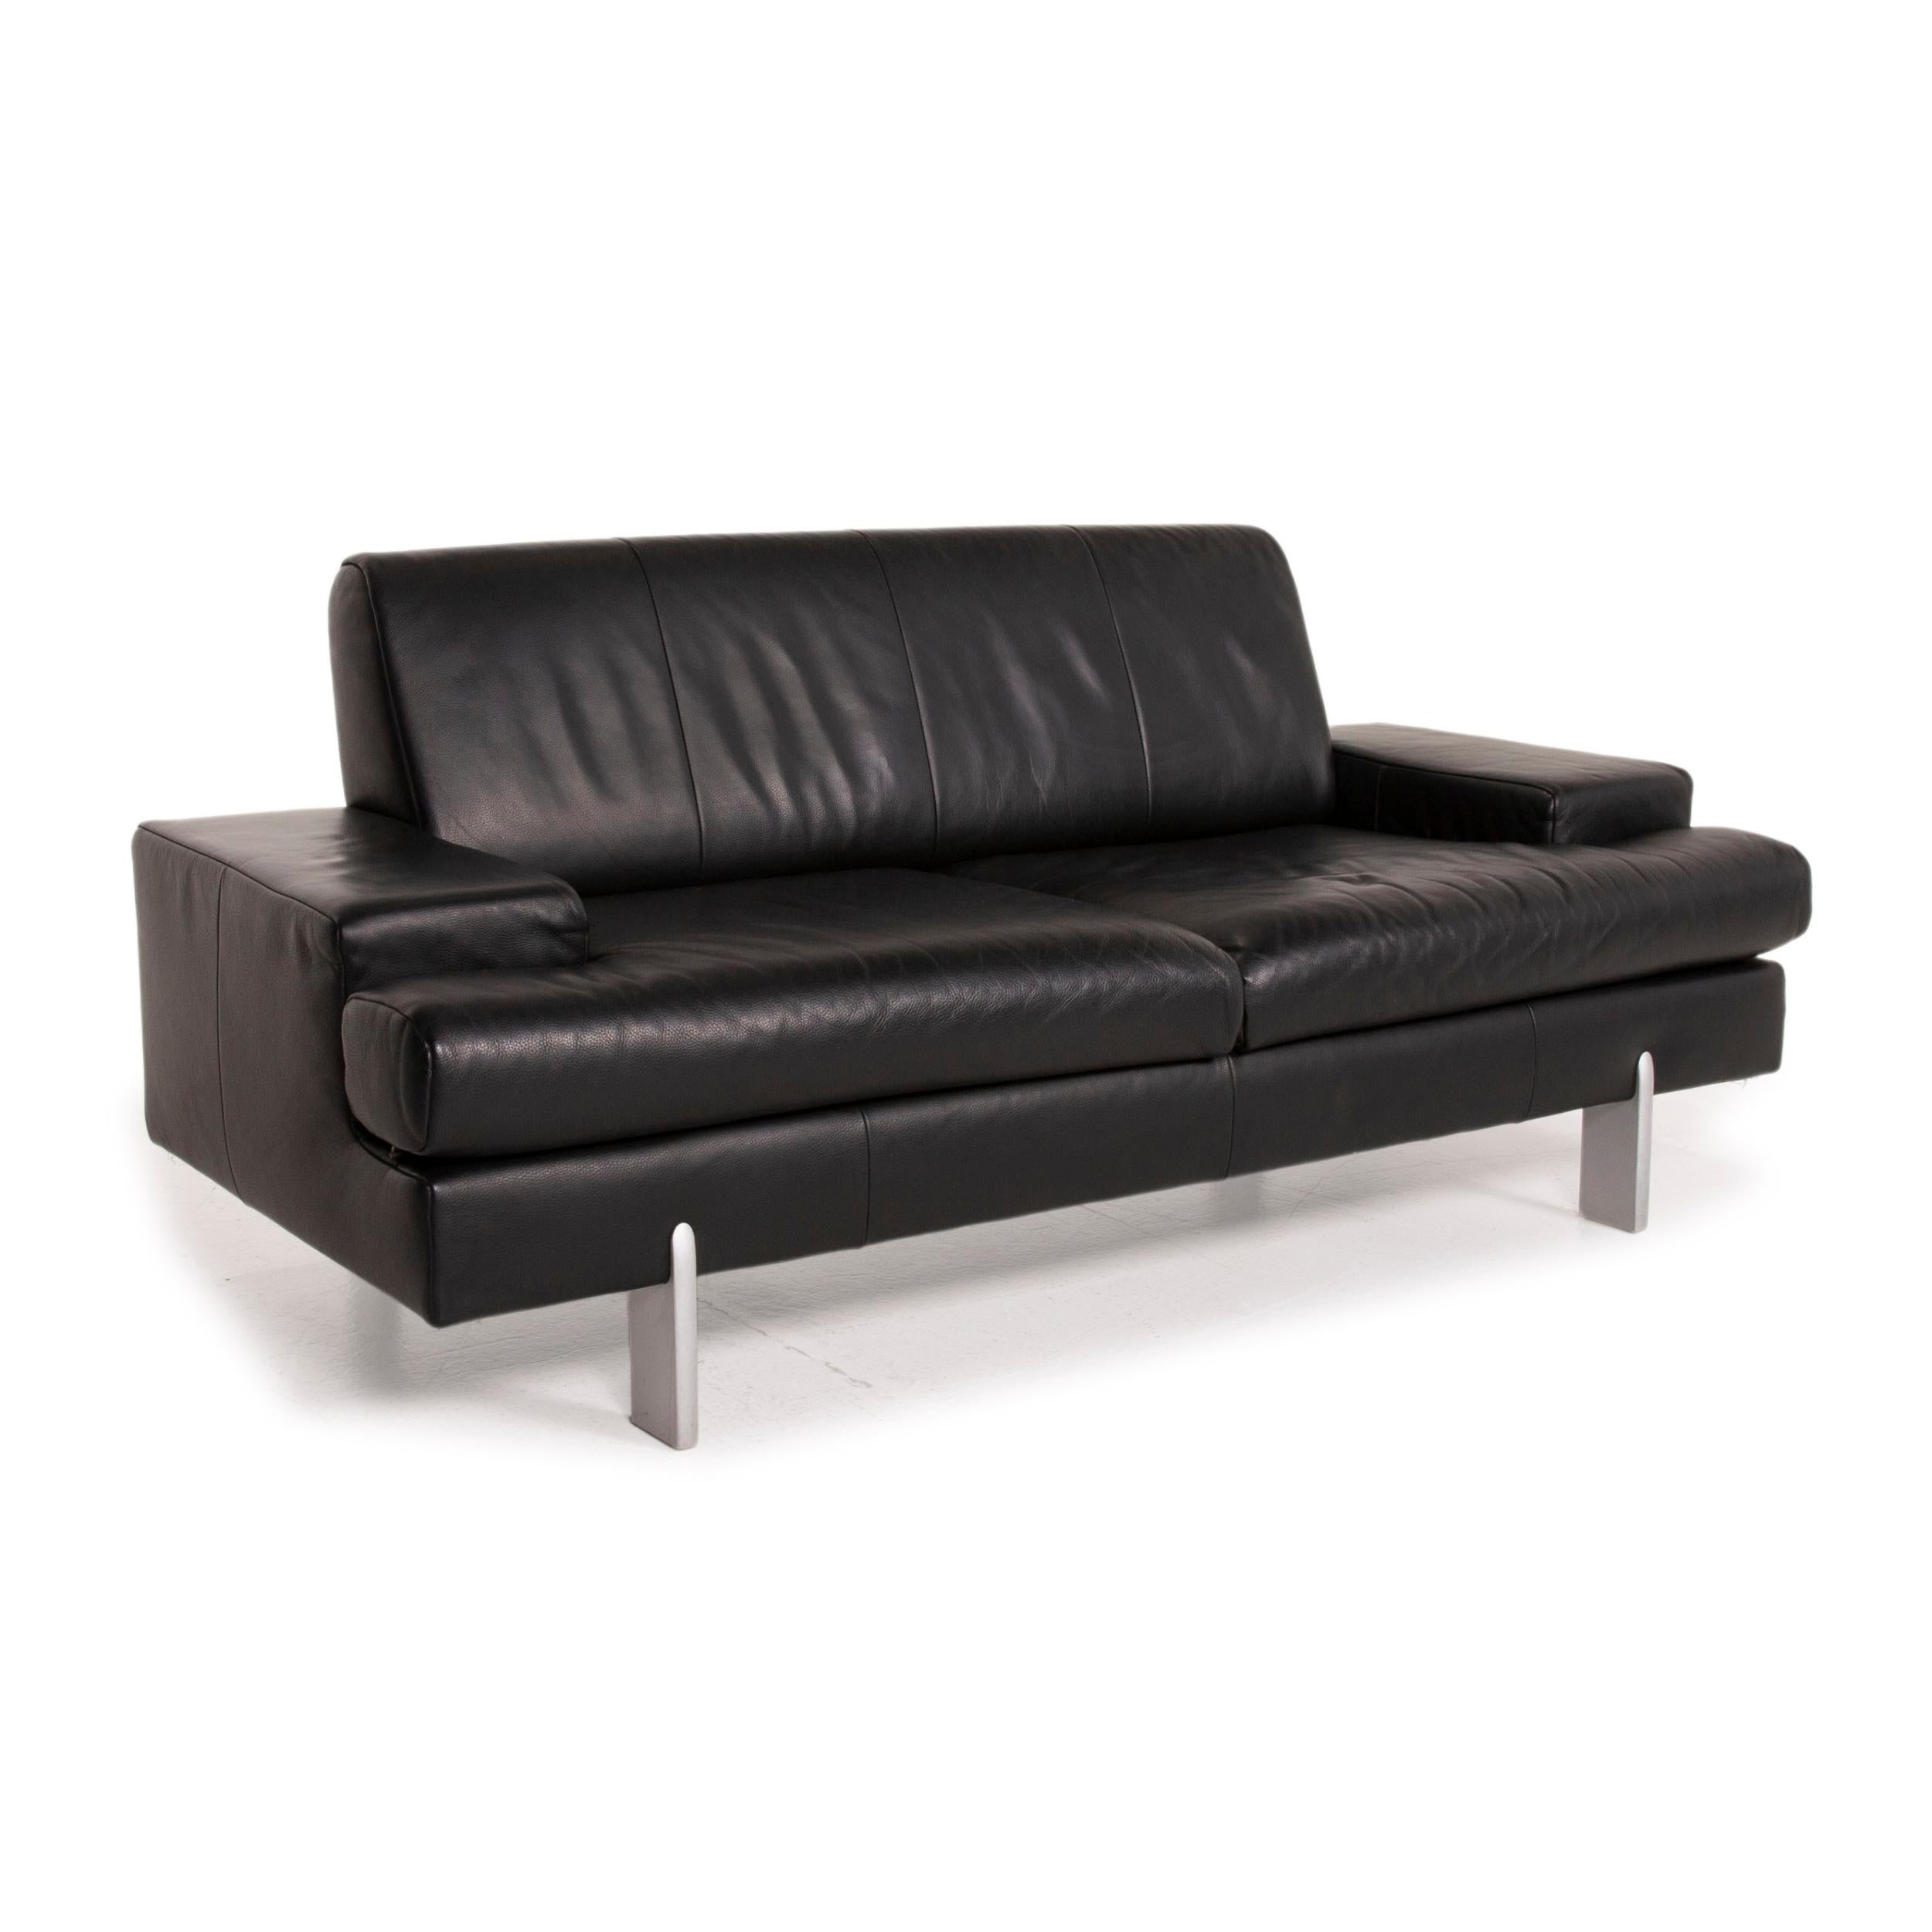 Contemporary Rolf Benz AK 644 Leather Sofa Black Two-Seater Couch